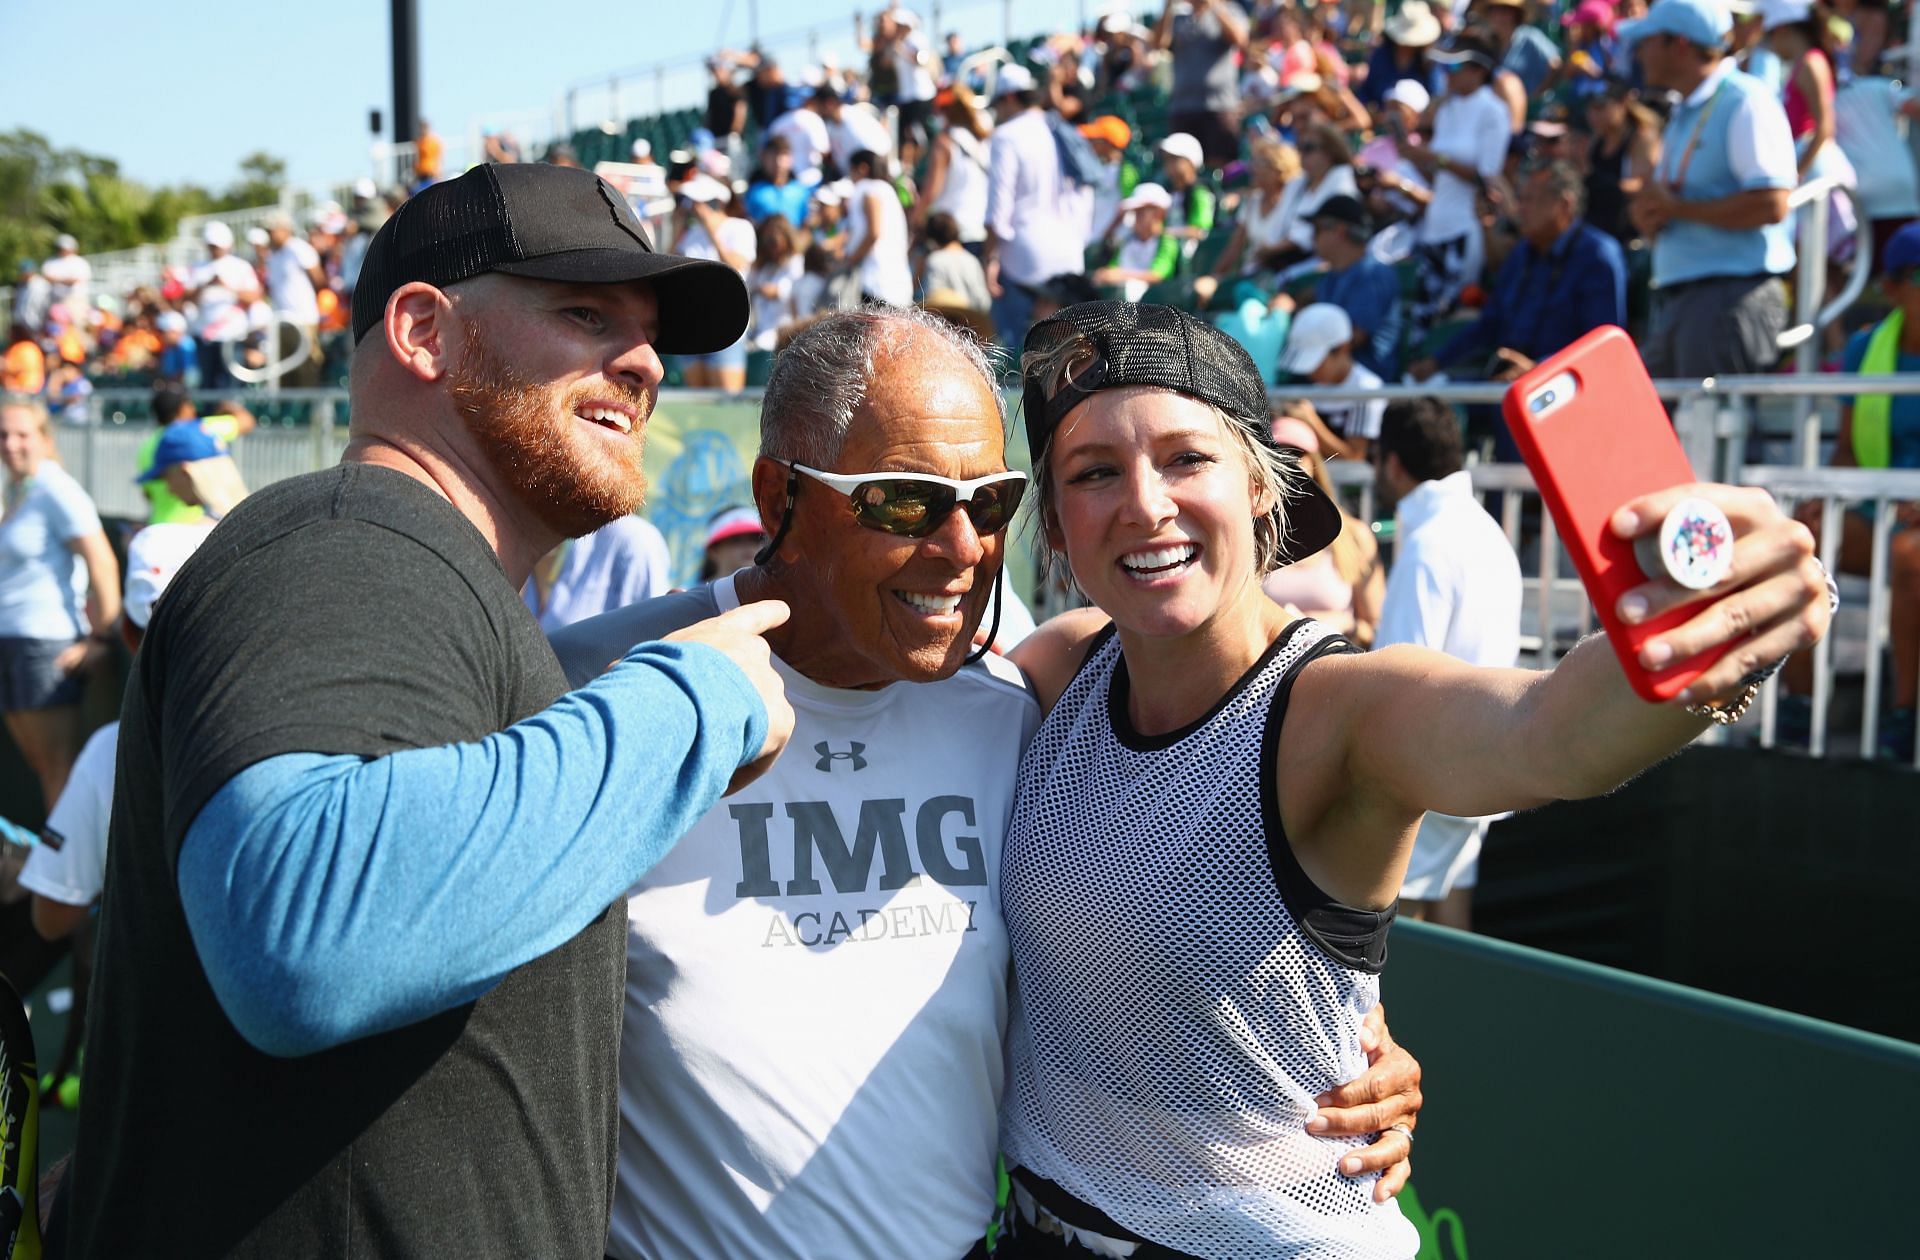 Bethanie Matek Sands takes a picture with Nick Bollettieri (center) at Miami Open 2018 - Day 2.